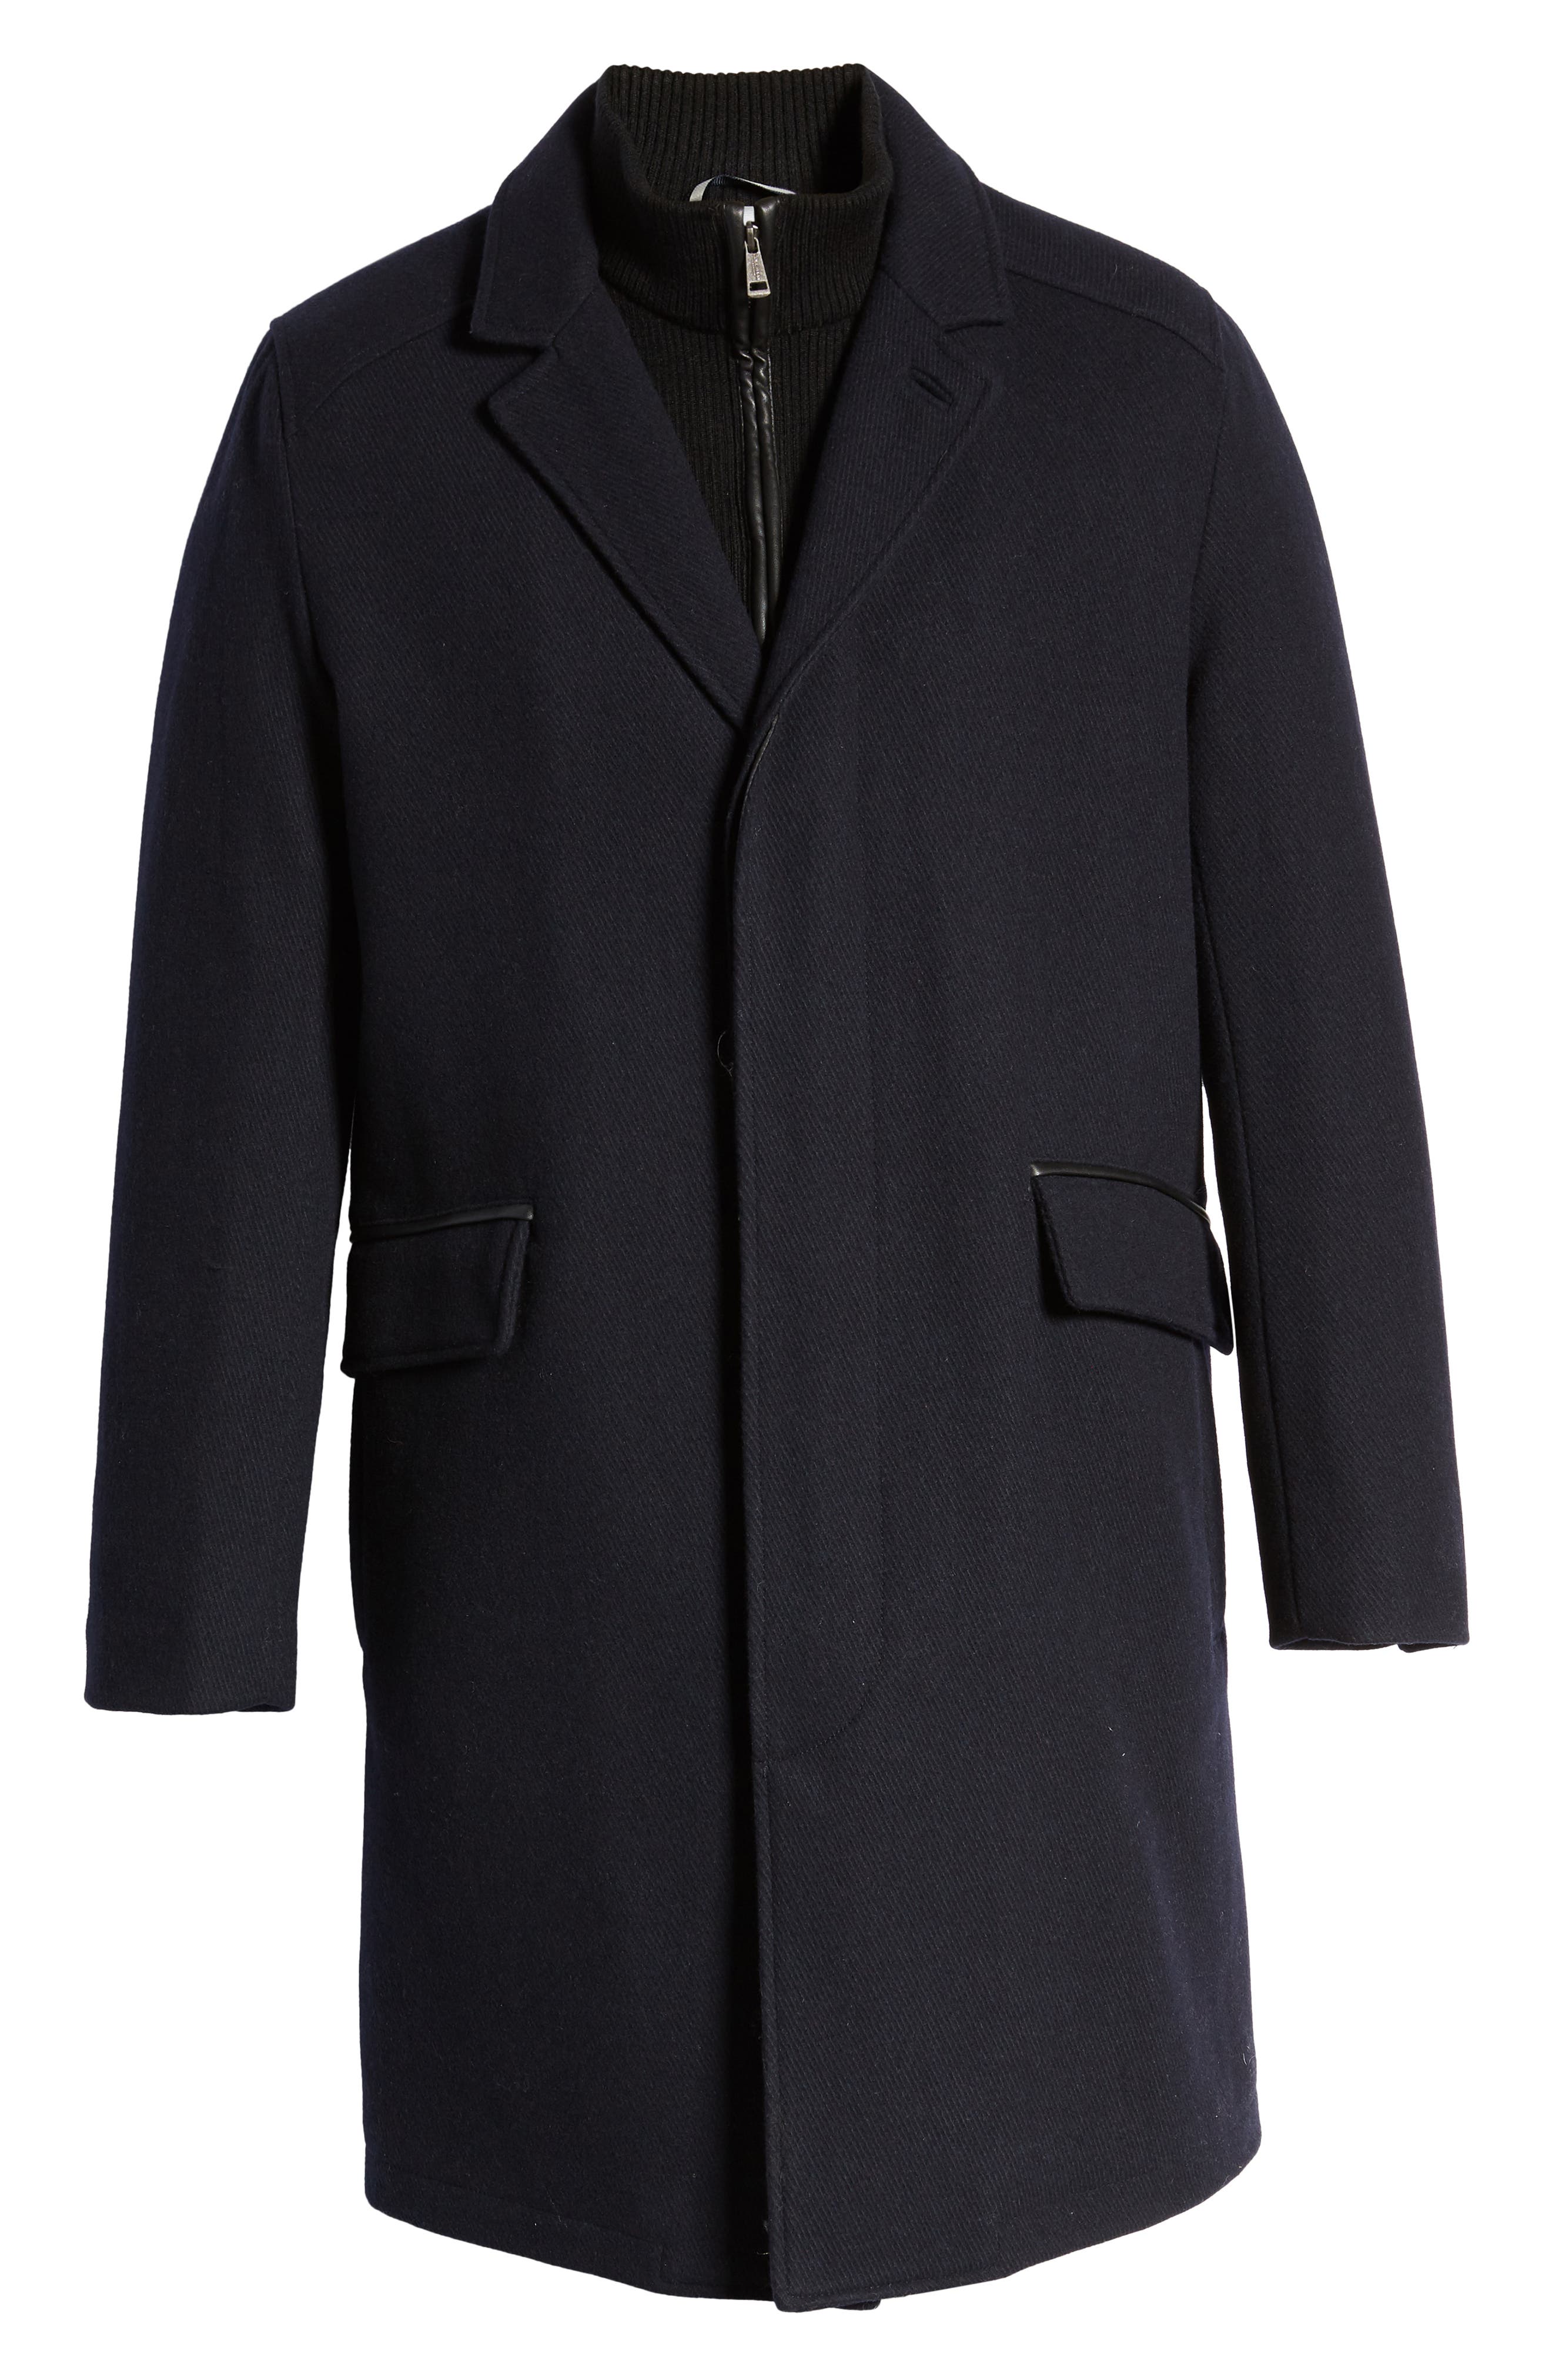 Cole Haan Wool Blend Overcoat With Knit Bib Inset - Compare Price Cole ...